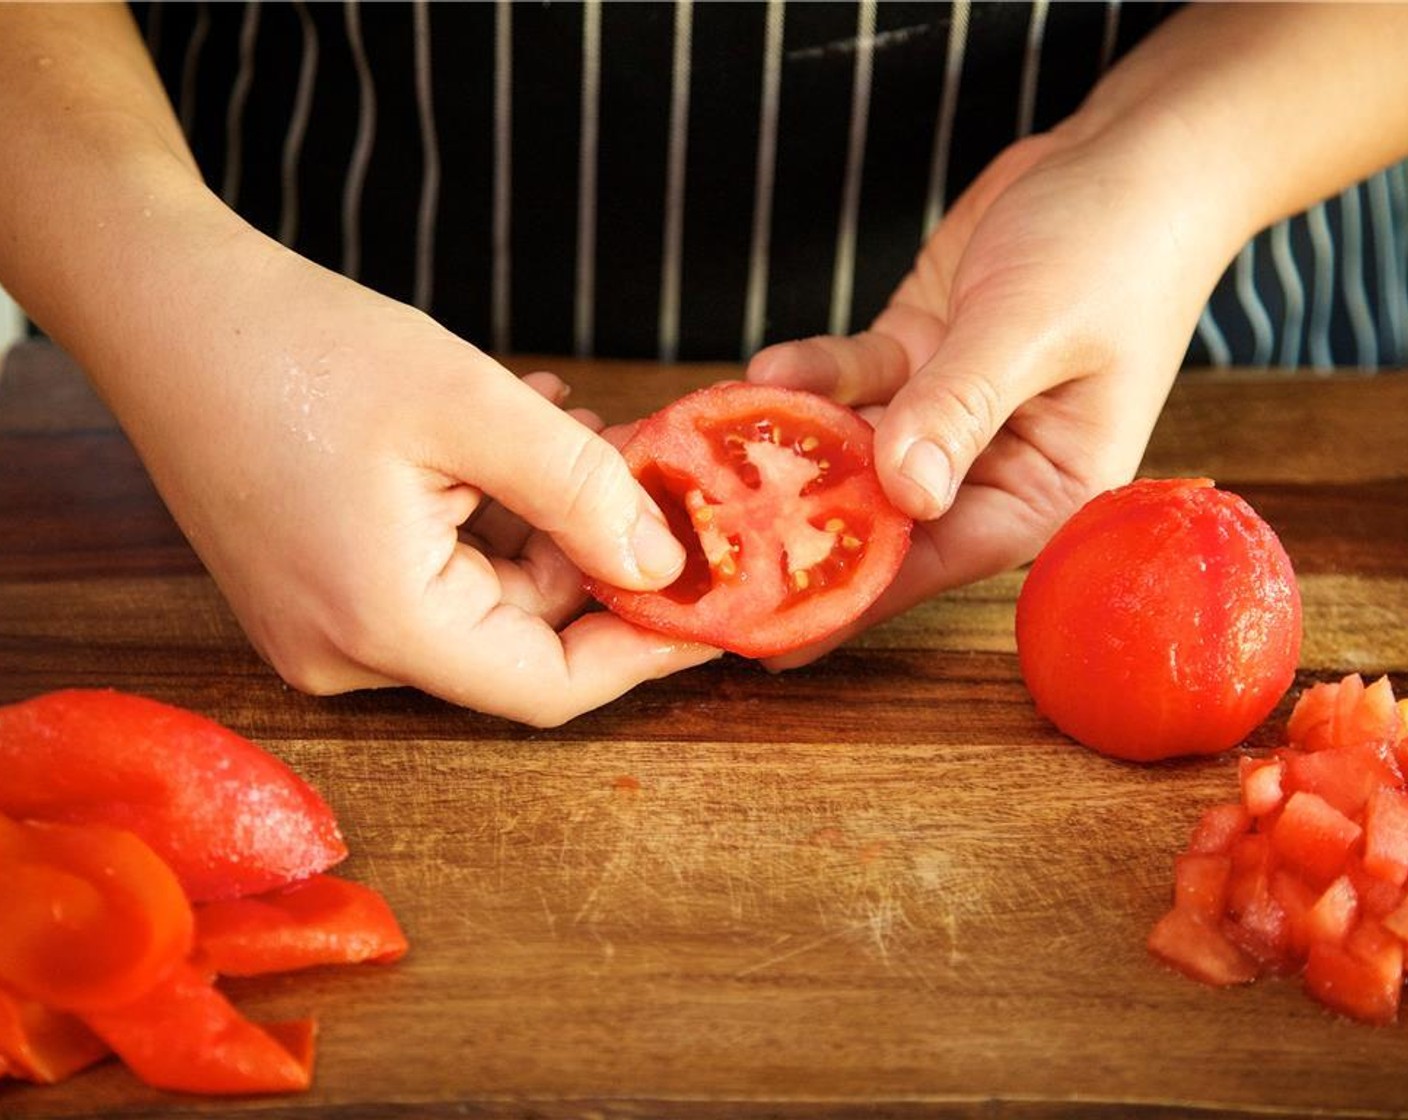 step 10 When the tomatoes have cooled, peel the skin from the tomatoes and discard skins. With the top of each tomato facing upwards, slice each tomato in half across horizontally. Using your fingers, discard the seeds and the interior flesh.